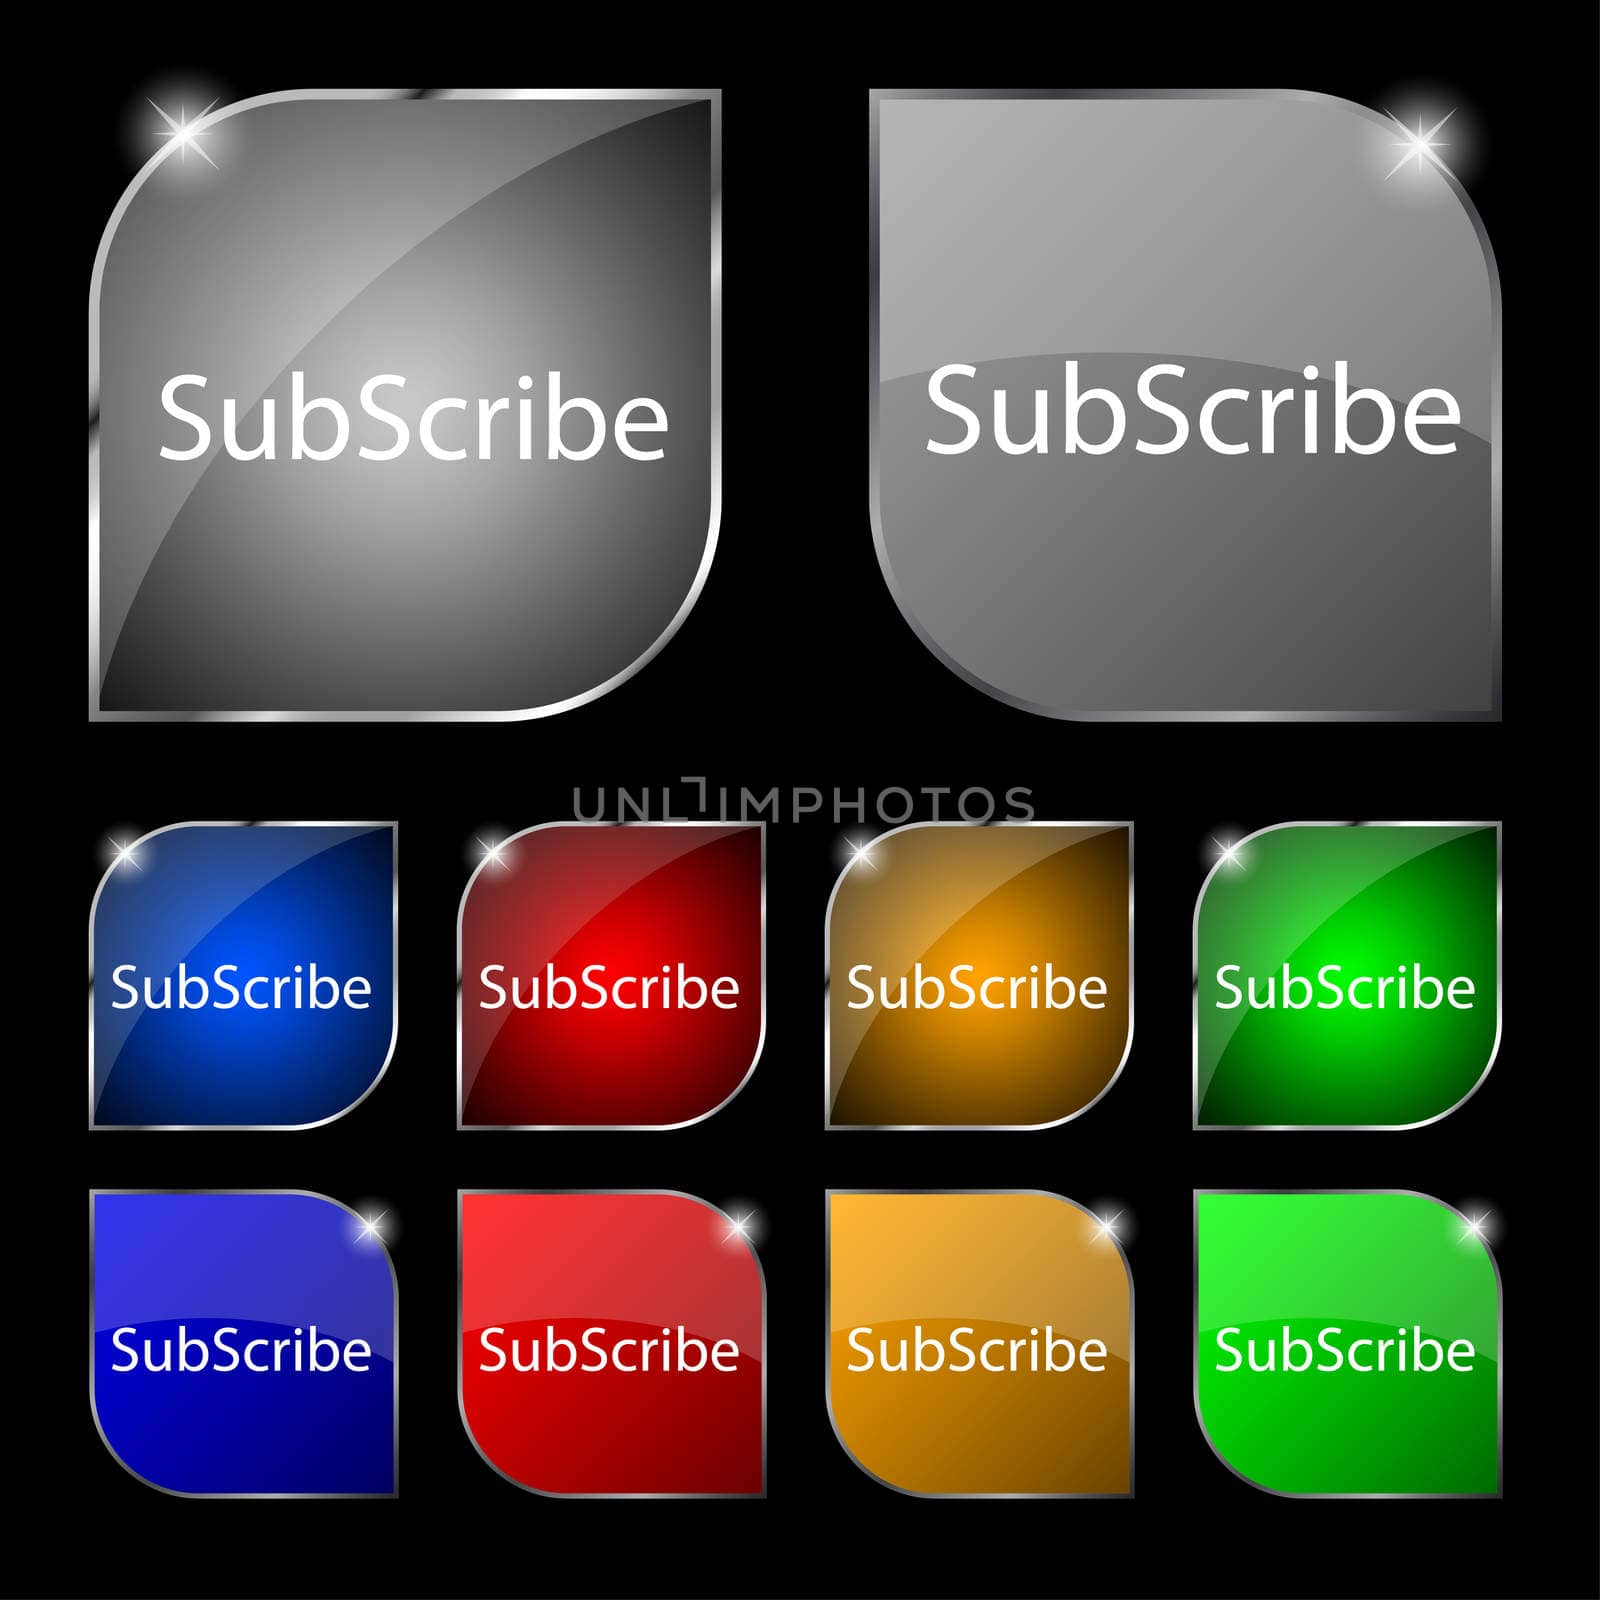 Subscribe sign icon. Membership symbol. Website navigation. Set of colored buttons illustration